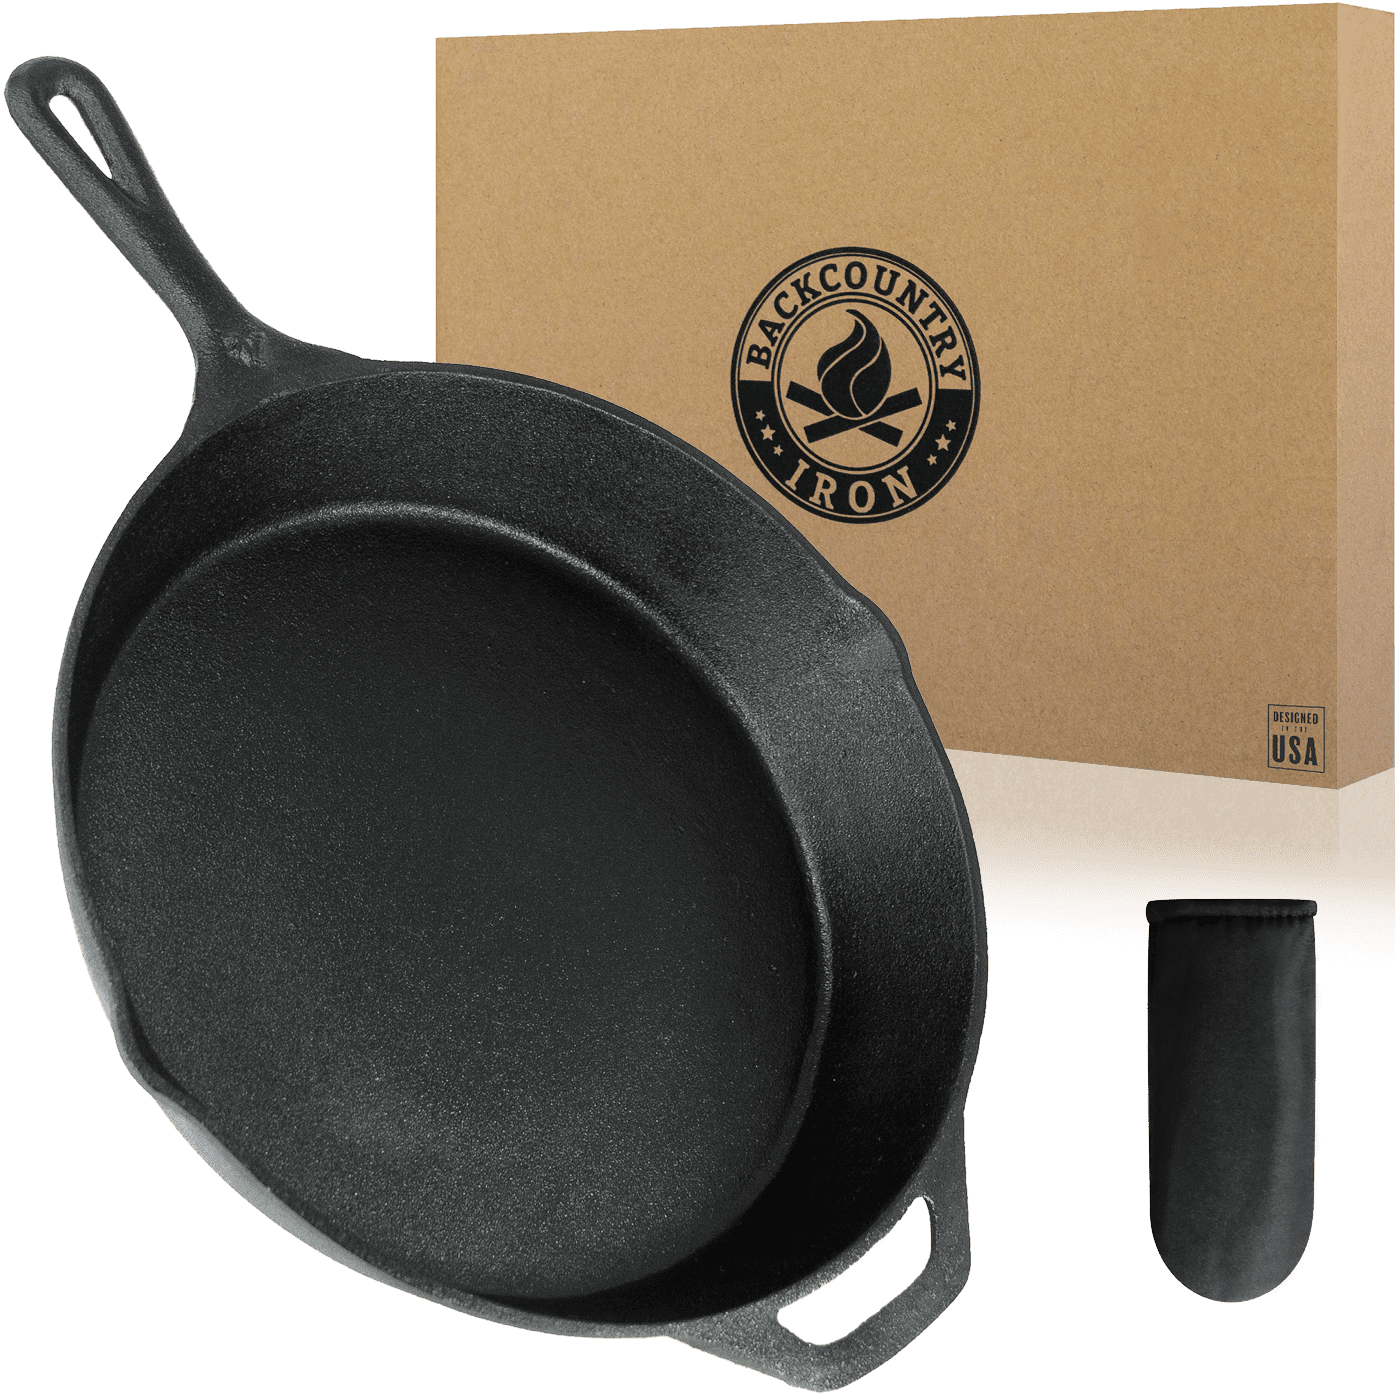 Outback Round Cast Iron Grill Pan Skillet Folding Wood Handle 26cm10.5  Camping